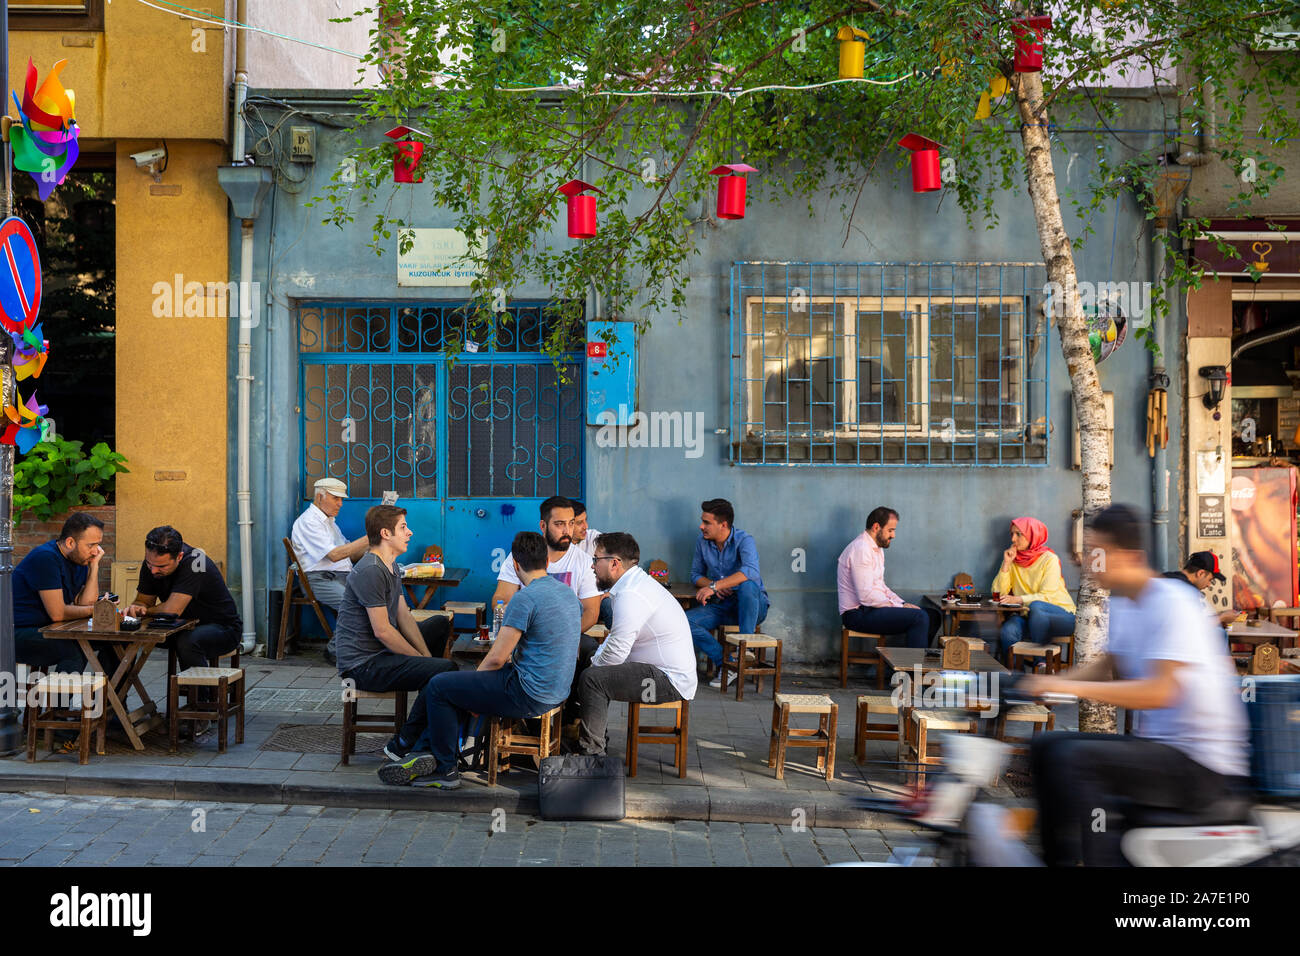 Turkish people are spending time at street cafes in Kuzguncuk.Kuzguncuk is a neighborhood in the Uskudar district on the Asian side of the Bosphorus. Stock Photo